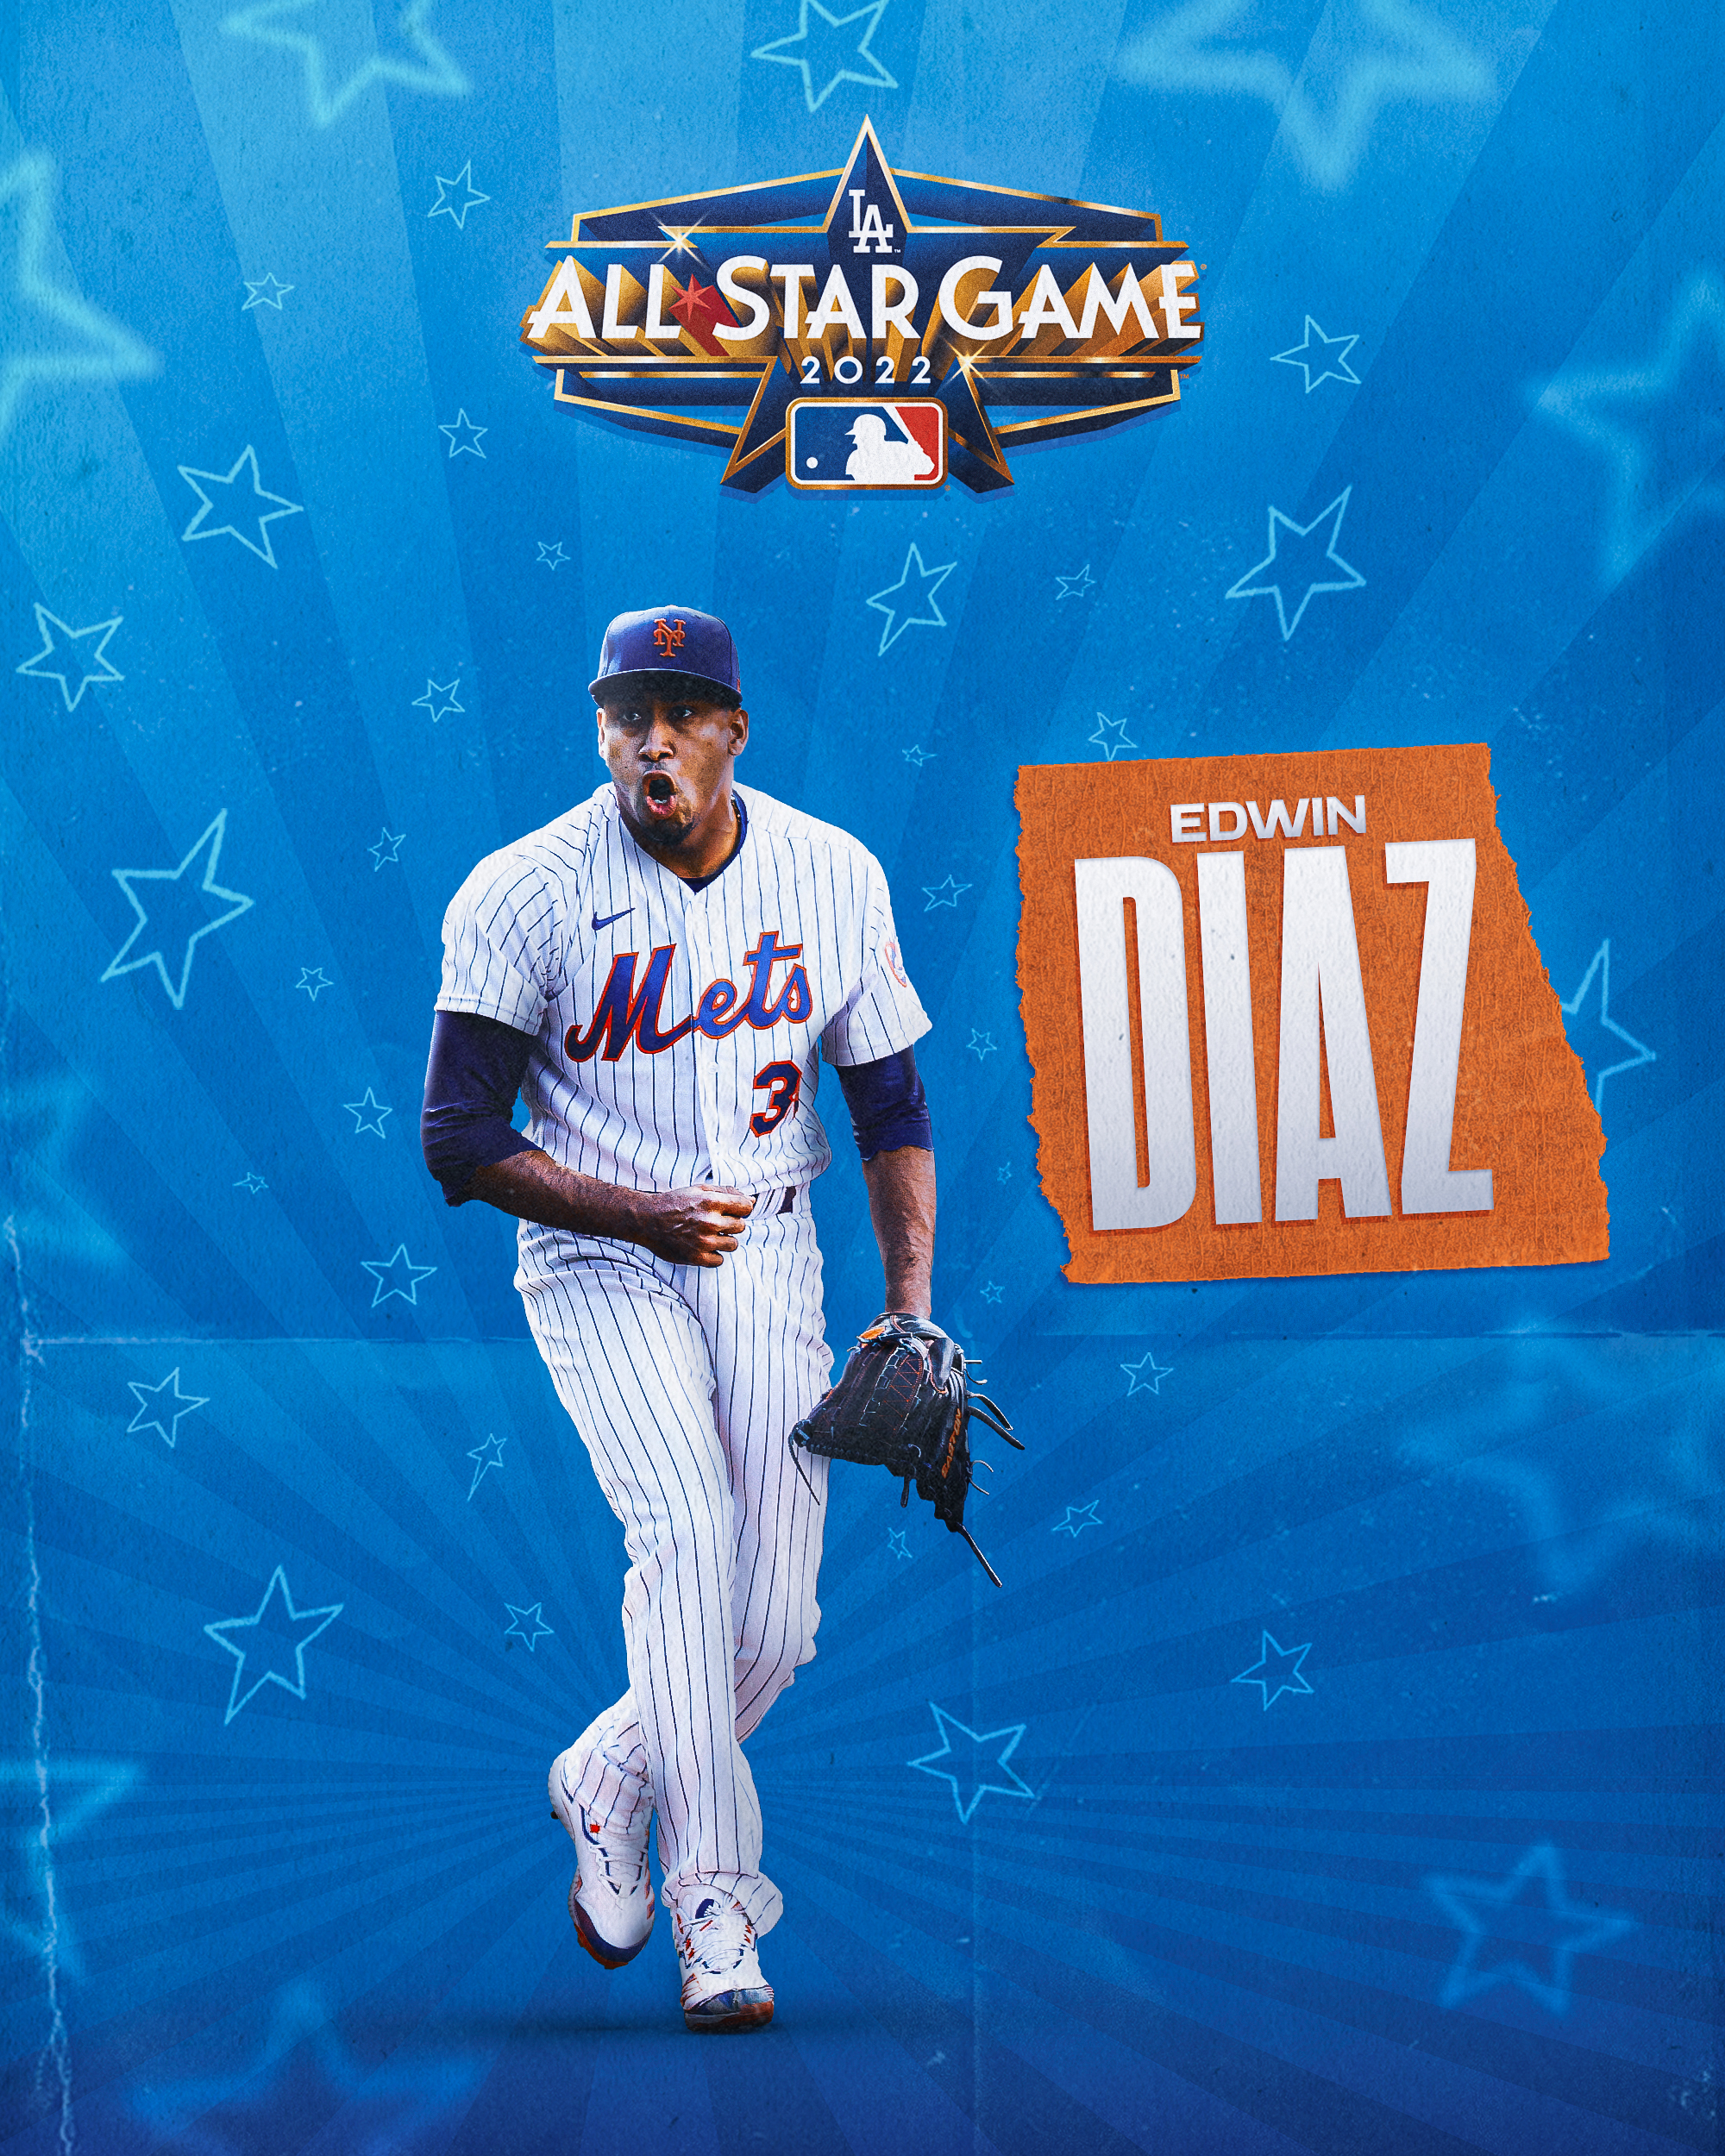 New York Mets on X: Congrats to @SugarDiaz39 for winning the